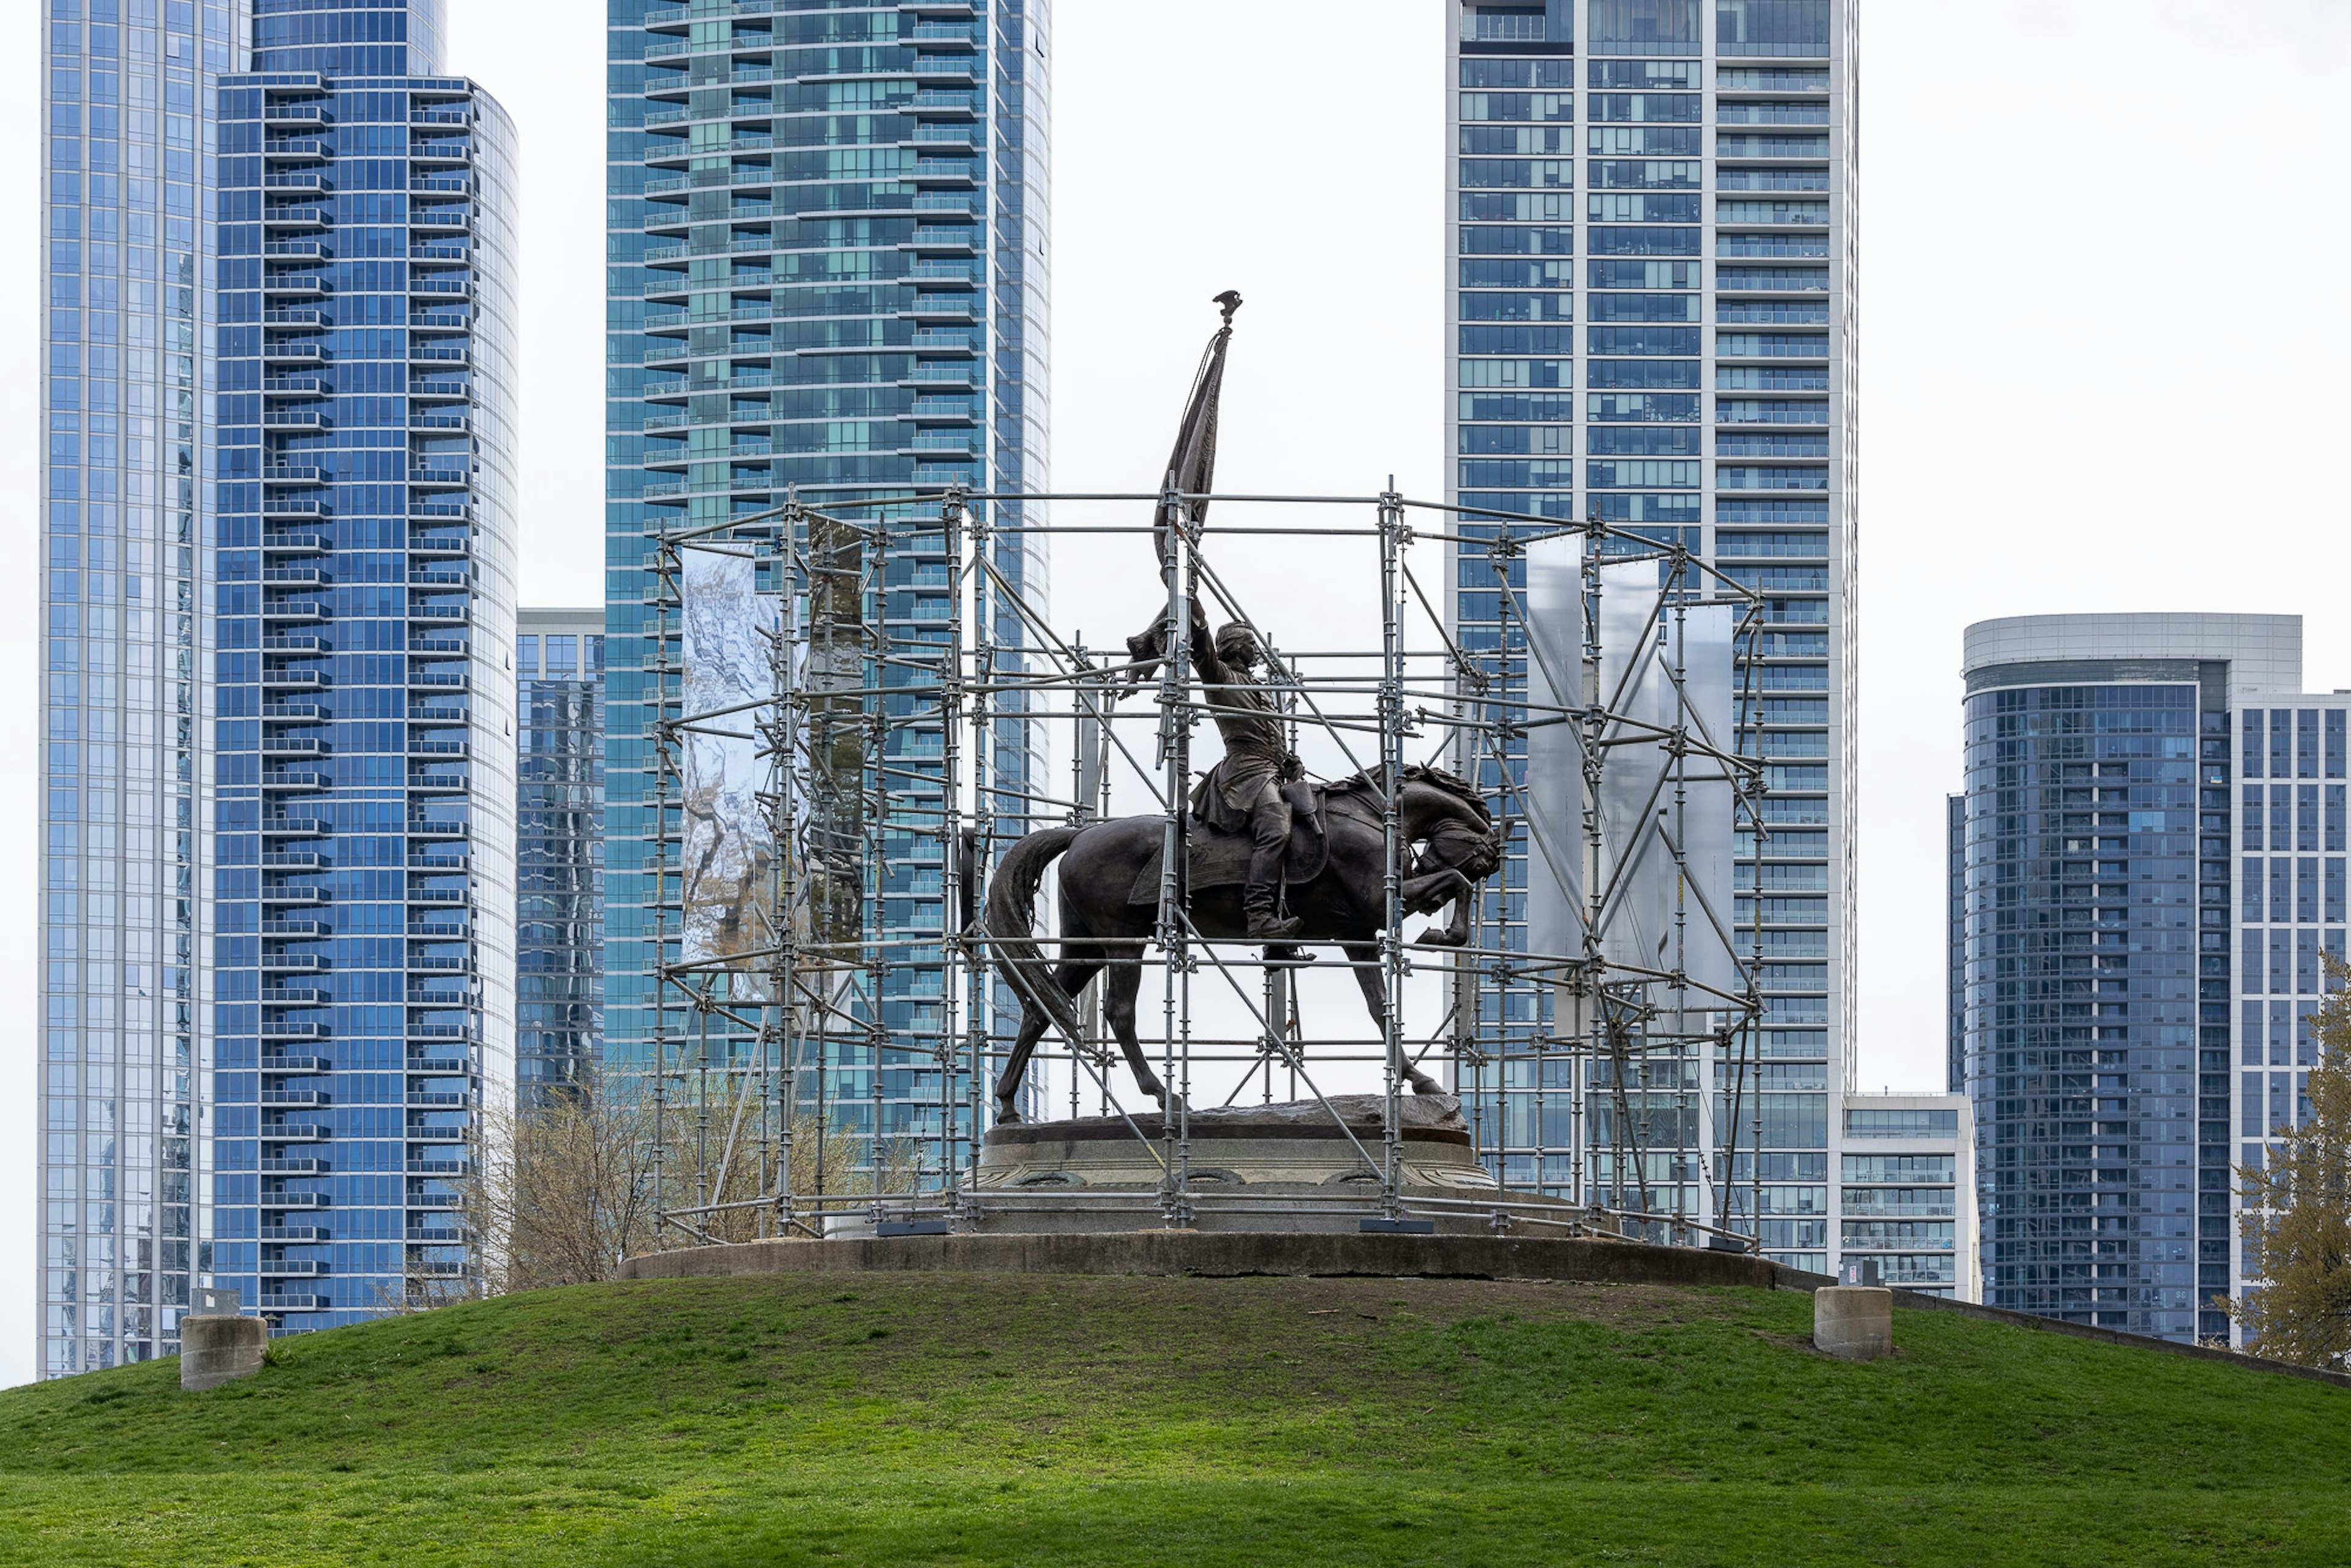 Brendan Fernandes, New Monuments | Chicago, 2024. General John Alexander Logan Monument, Grant Park, Chicago, IL. Presented by Black Cube Nomadic Art Museum in association with the Chicago Park District, as part of EXPO CHICAGO’s IN/SITU Outside program. Architectural Intervention by AIM Architecture. Courtesy the artist and Black Cube Nomadic Art Museum. Photo: Matthew Reeves Photography. 